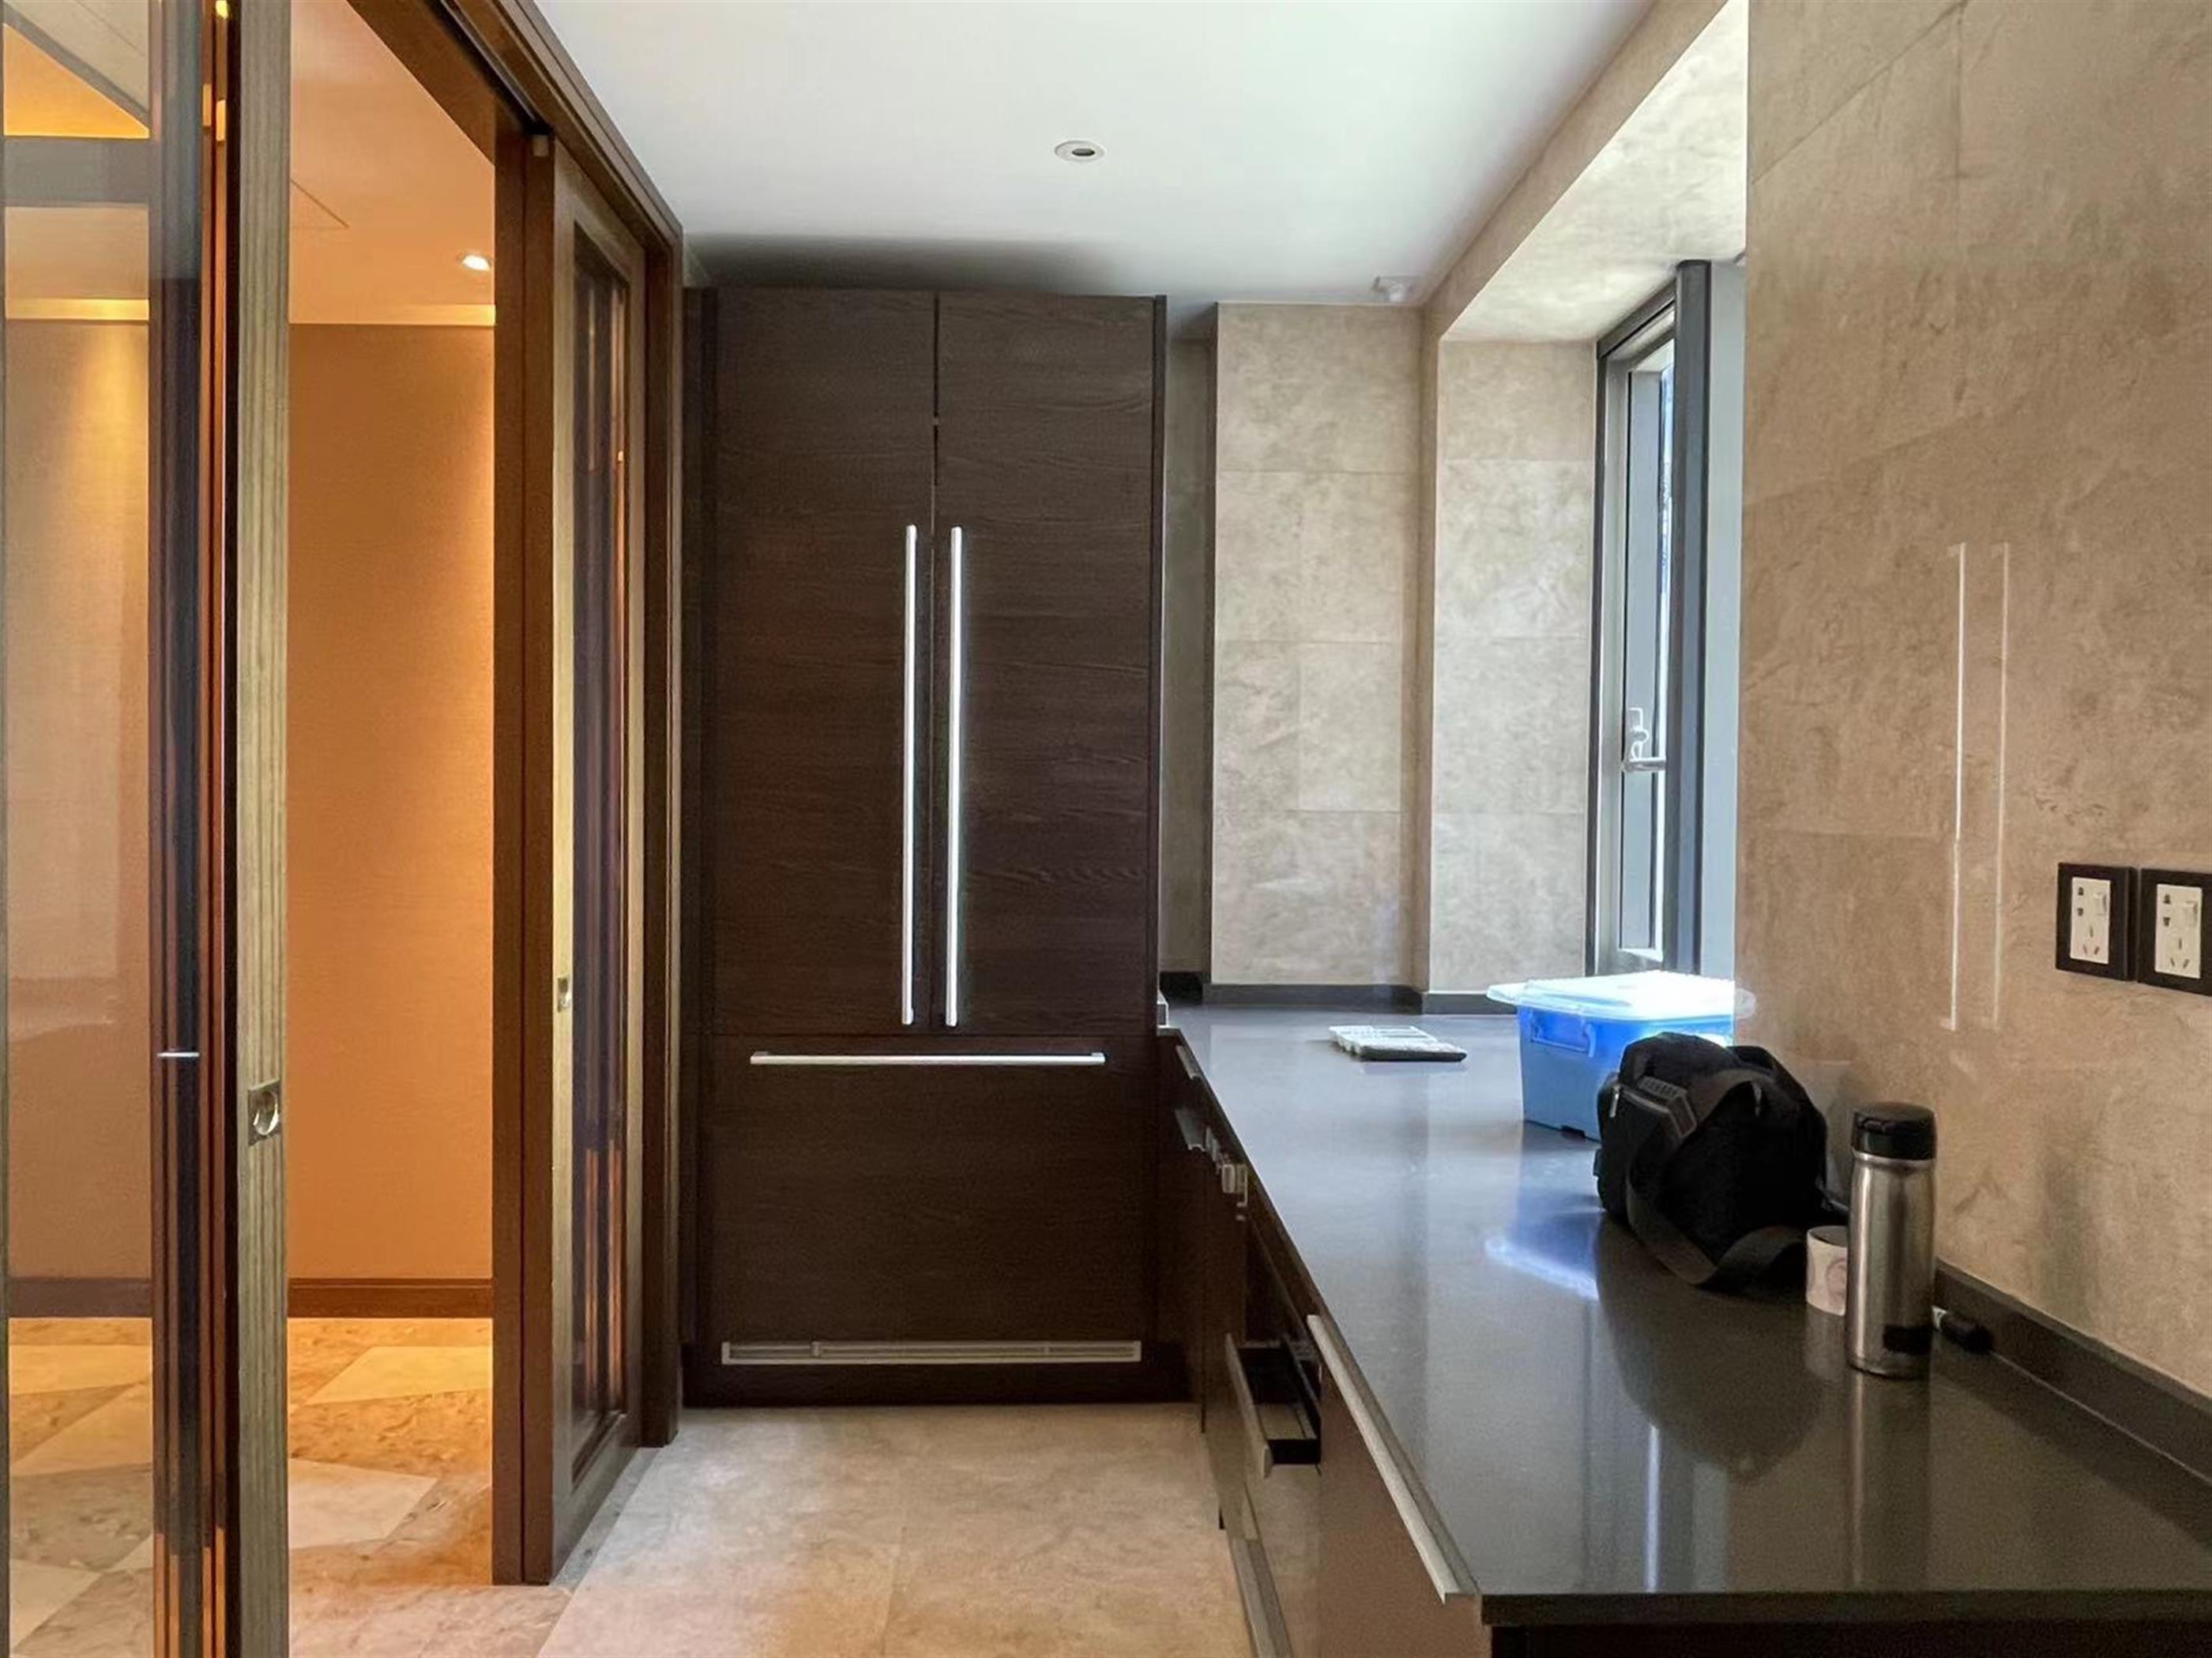 Chinese kitchen Deluxe Spacious Classic 3BR Apartment for Rent in Shanghai’s Xintiandi Neighborhood